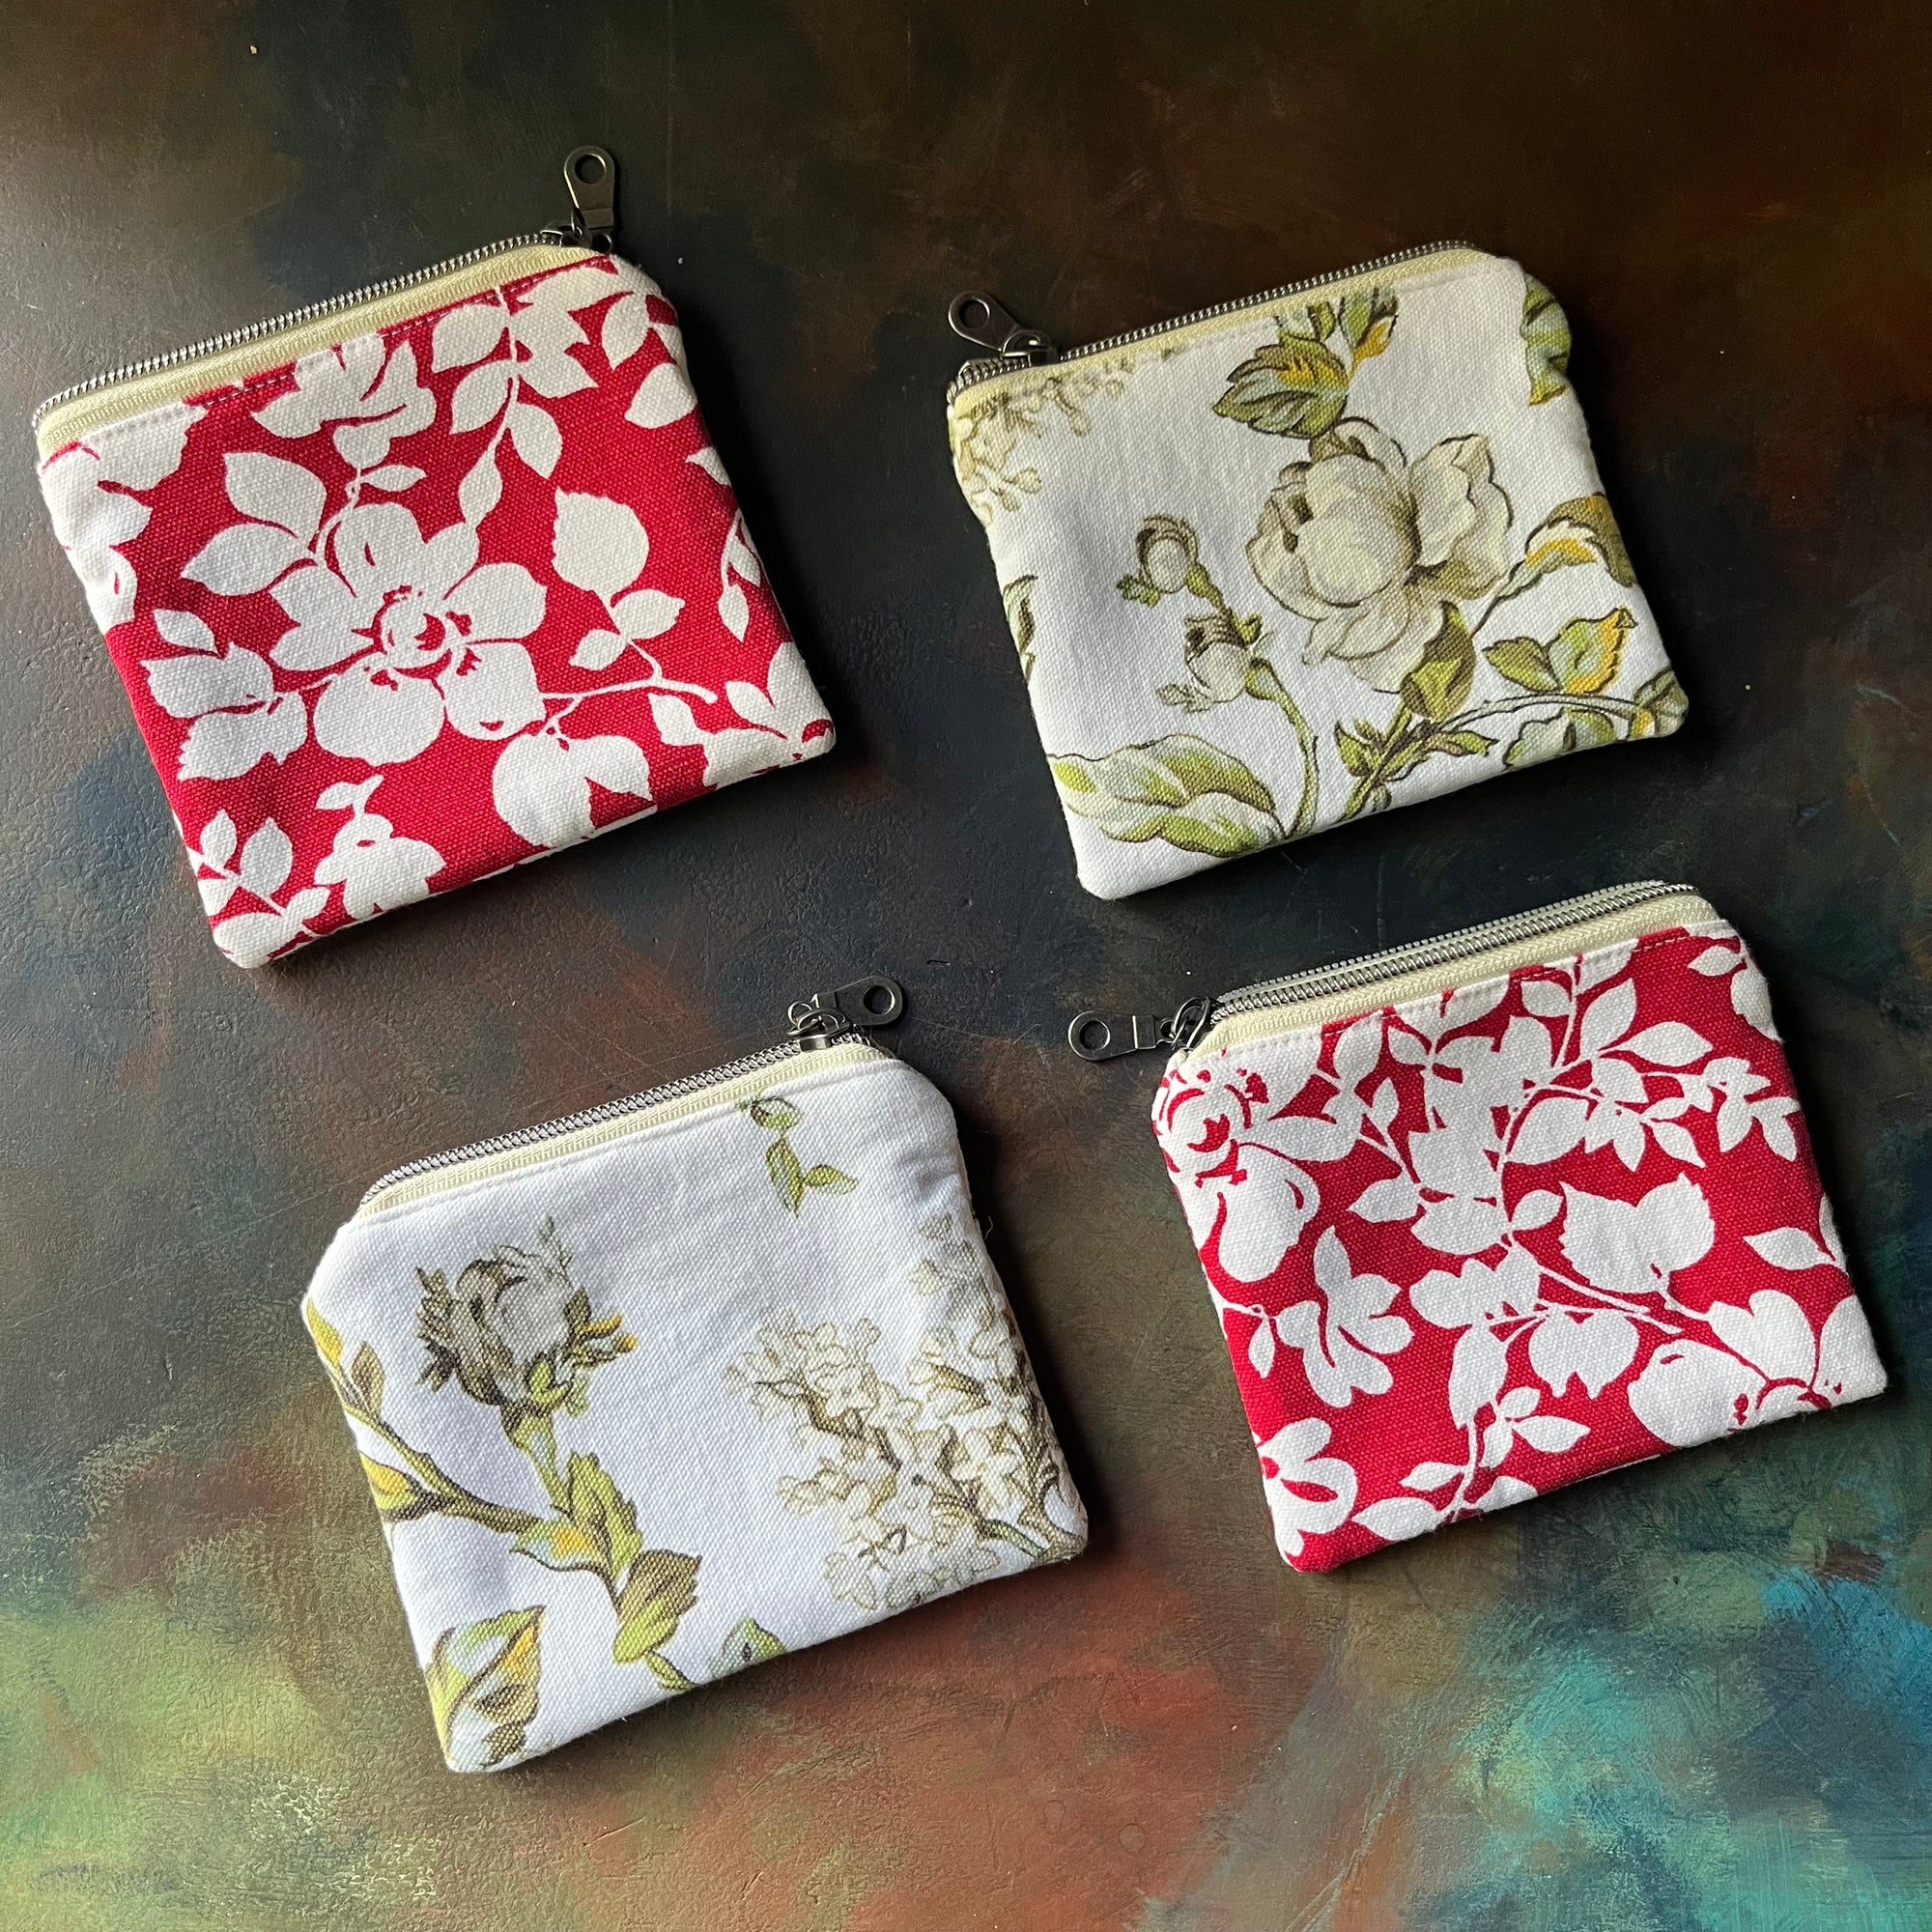 Coin Purse/Pouch - Small Wallet - Made from Vintage Tablecloth & Linens